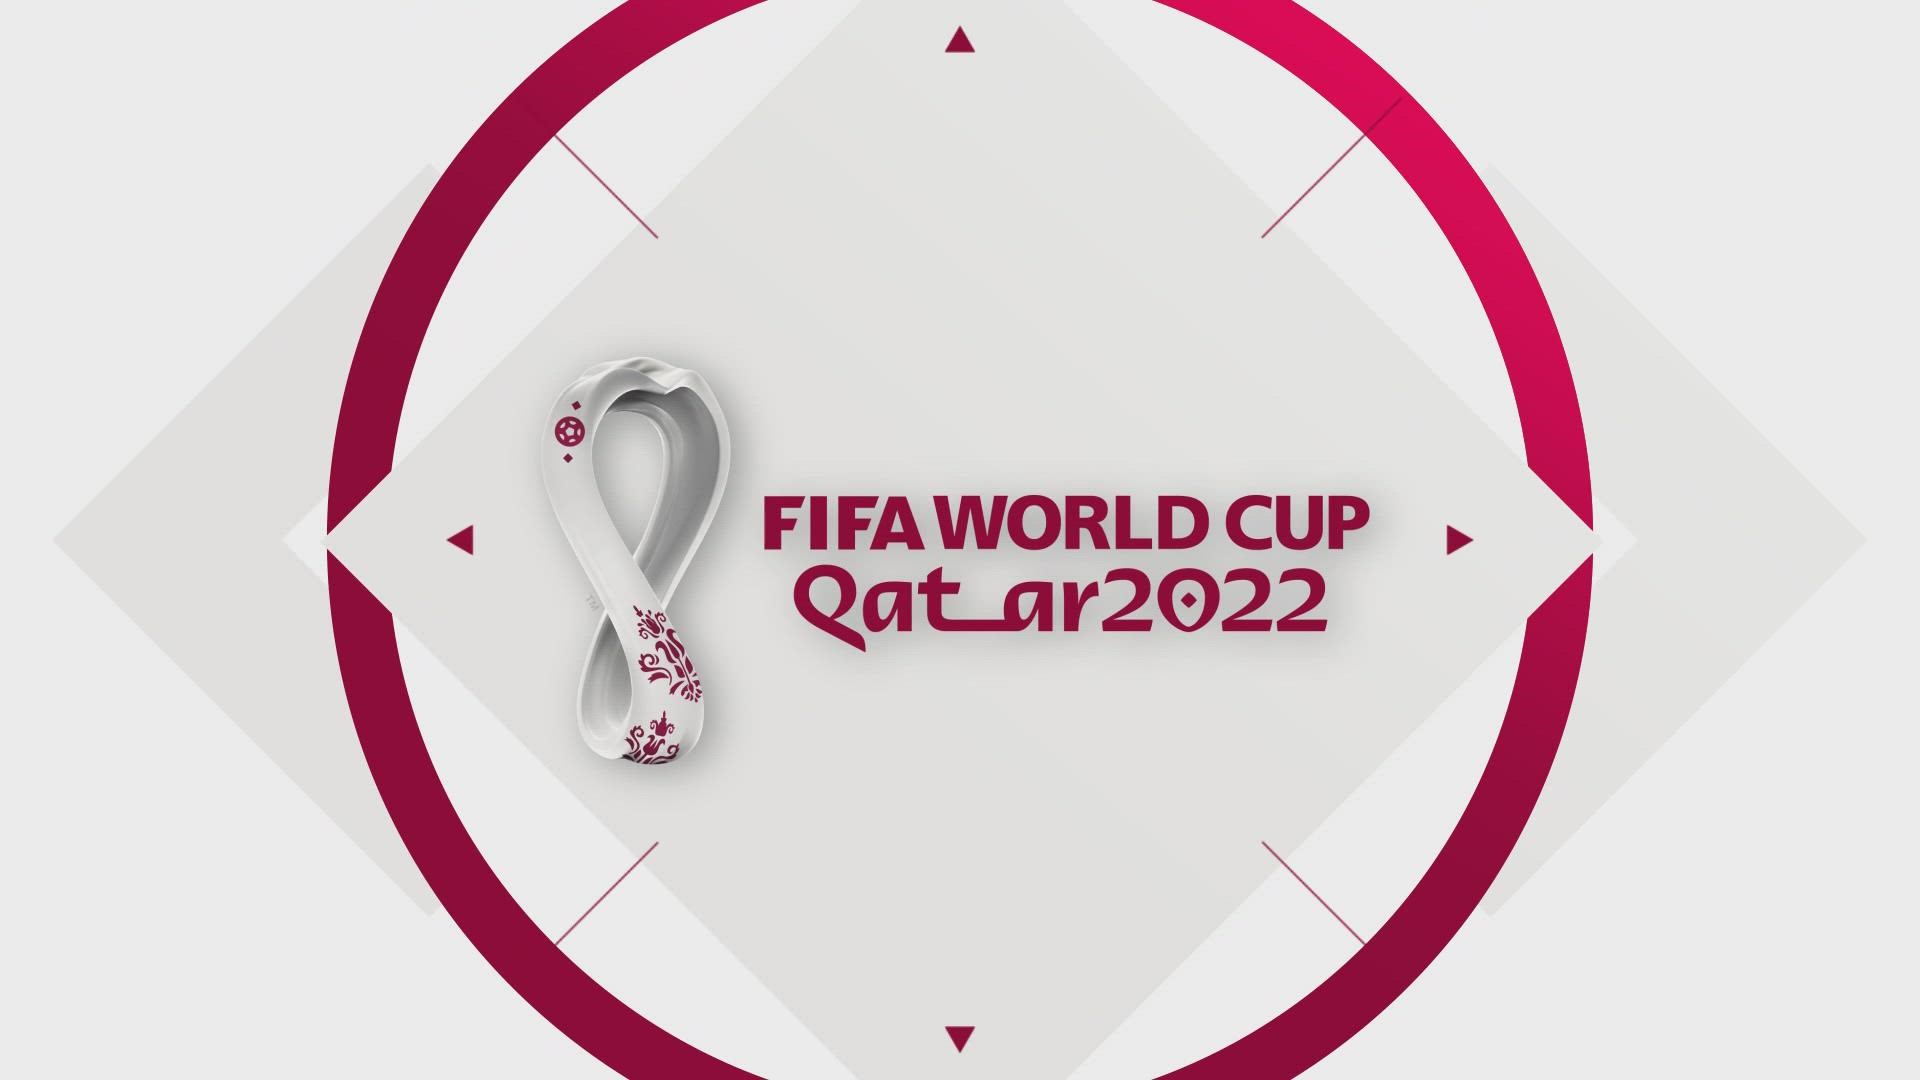 A look at the 2022 World Cup in Qatar as the event gets underway